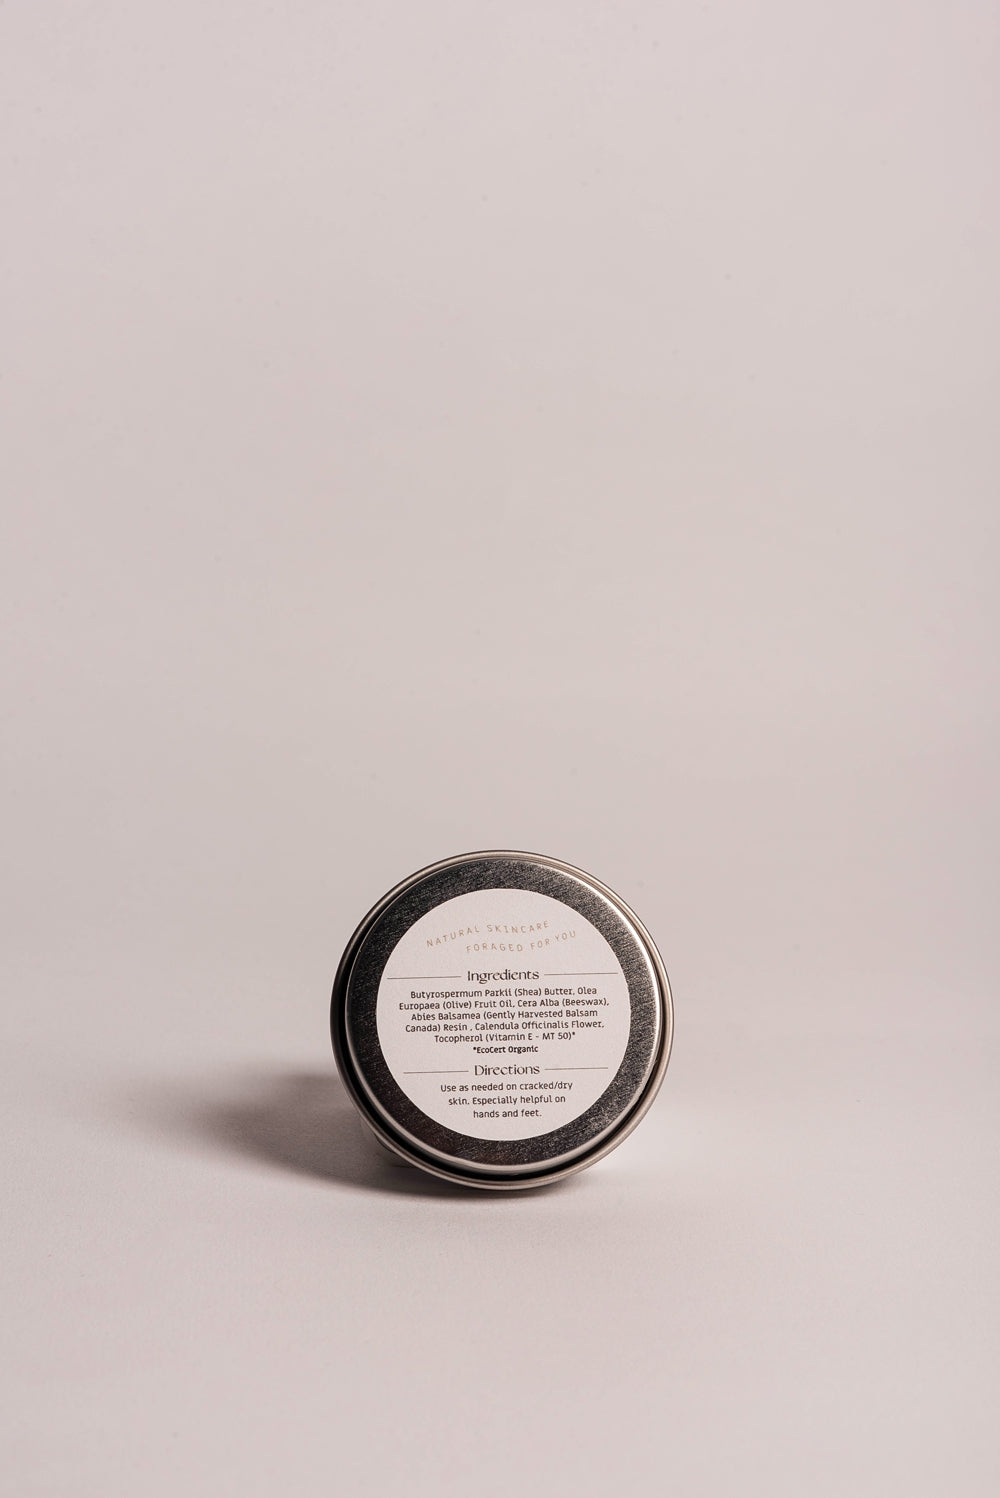 The Cedar Nook Balsam Fir Healing Salve for dry and cracked hands and feet in aluminum tin showing back label of organic ingredients with light pink background